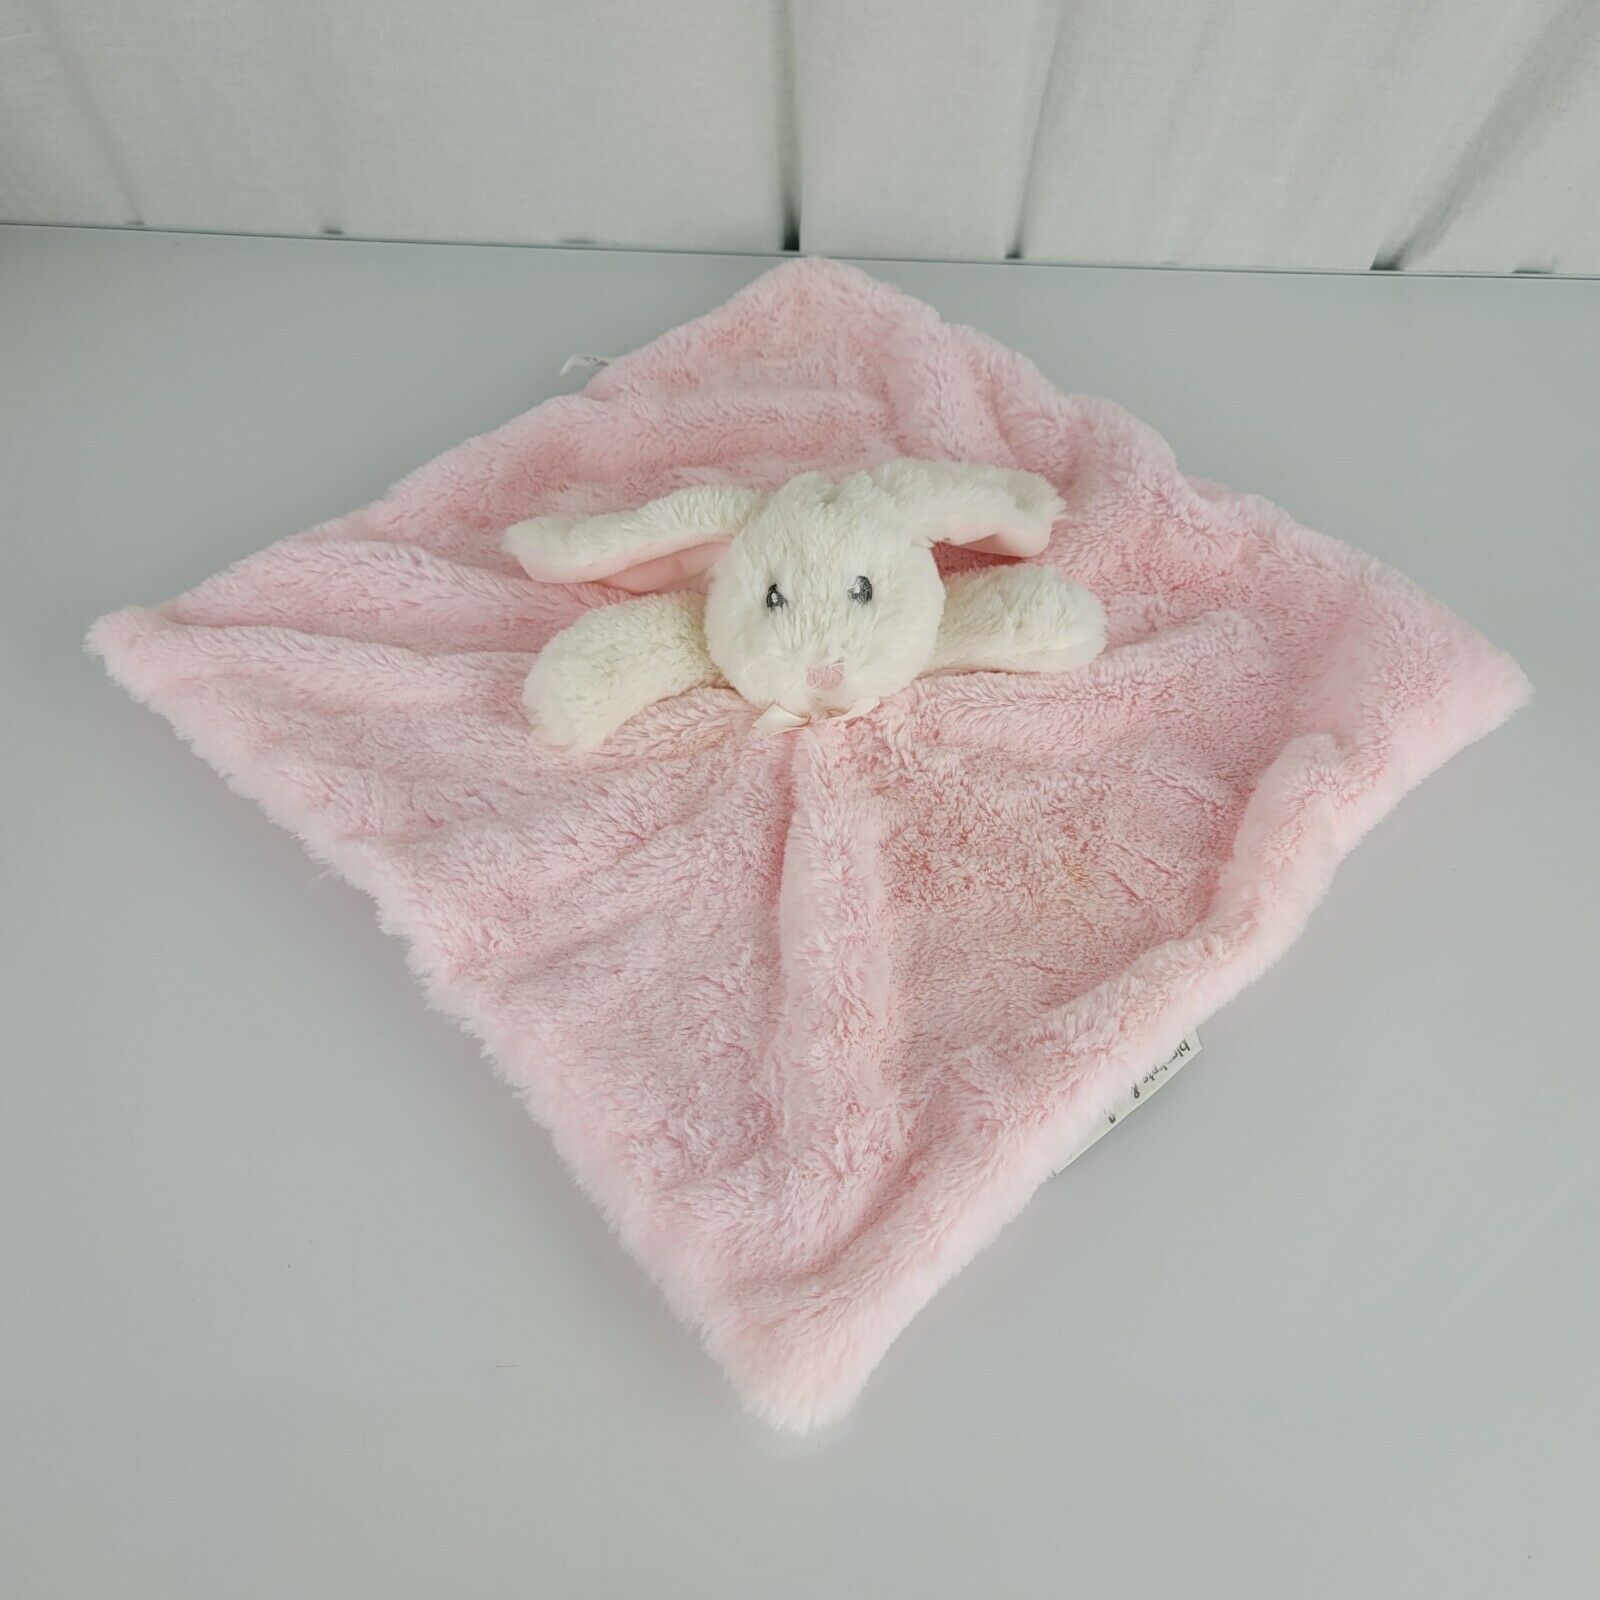 Primary image for Blankets and & Beyond Pink White Bunny Baby Blanket Plush Fluffy Soft Gray eyes